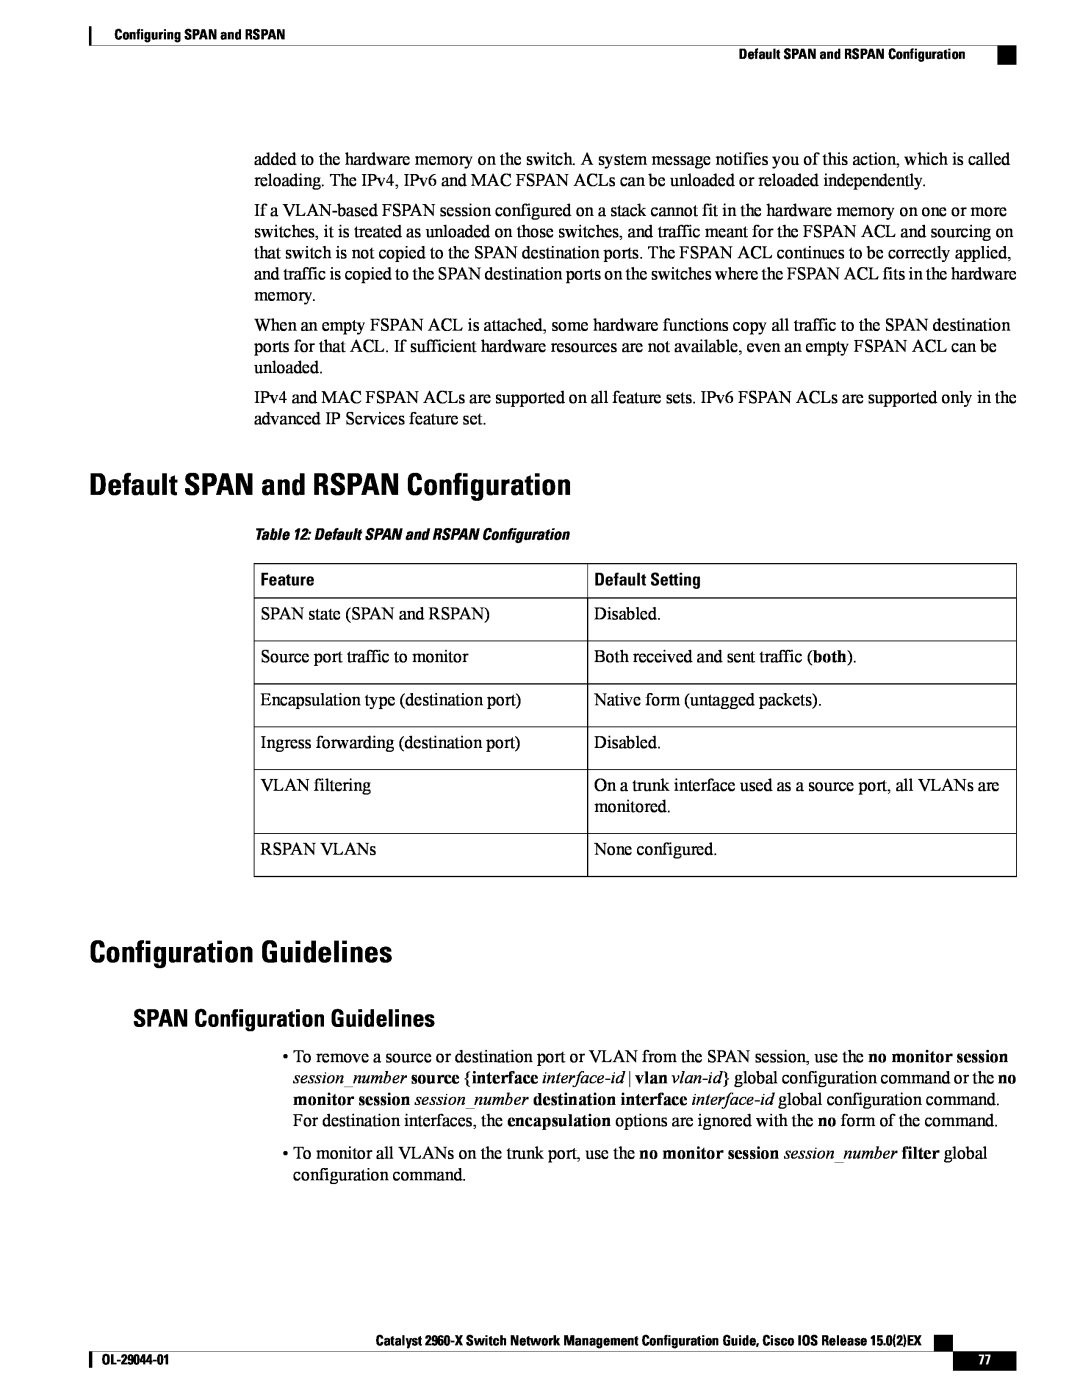 Cisco Systems C2960XSTACK, WSC2960X24TDL Default SPAN and RSPAN Configuration, SPAN Configuration Guidelines, Feature 